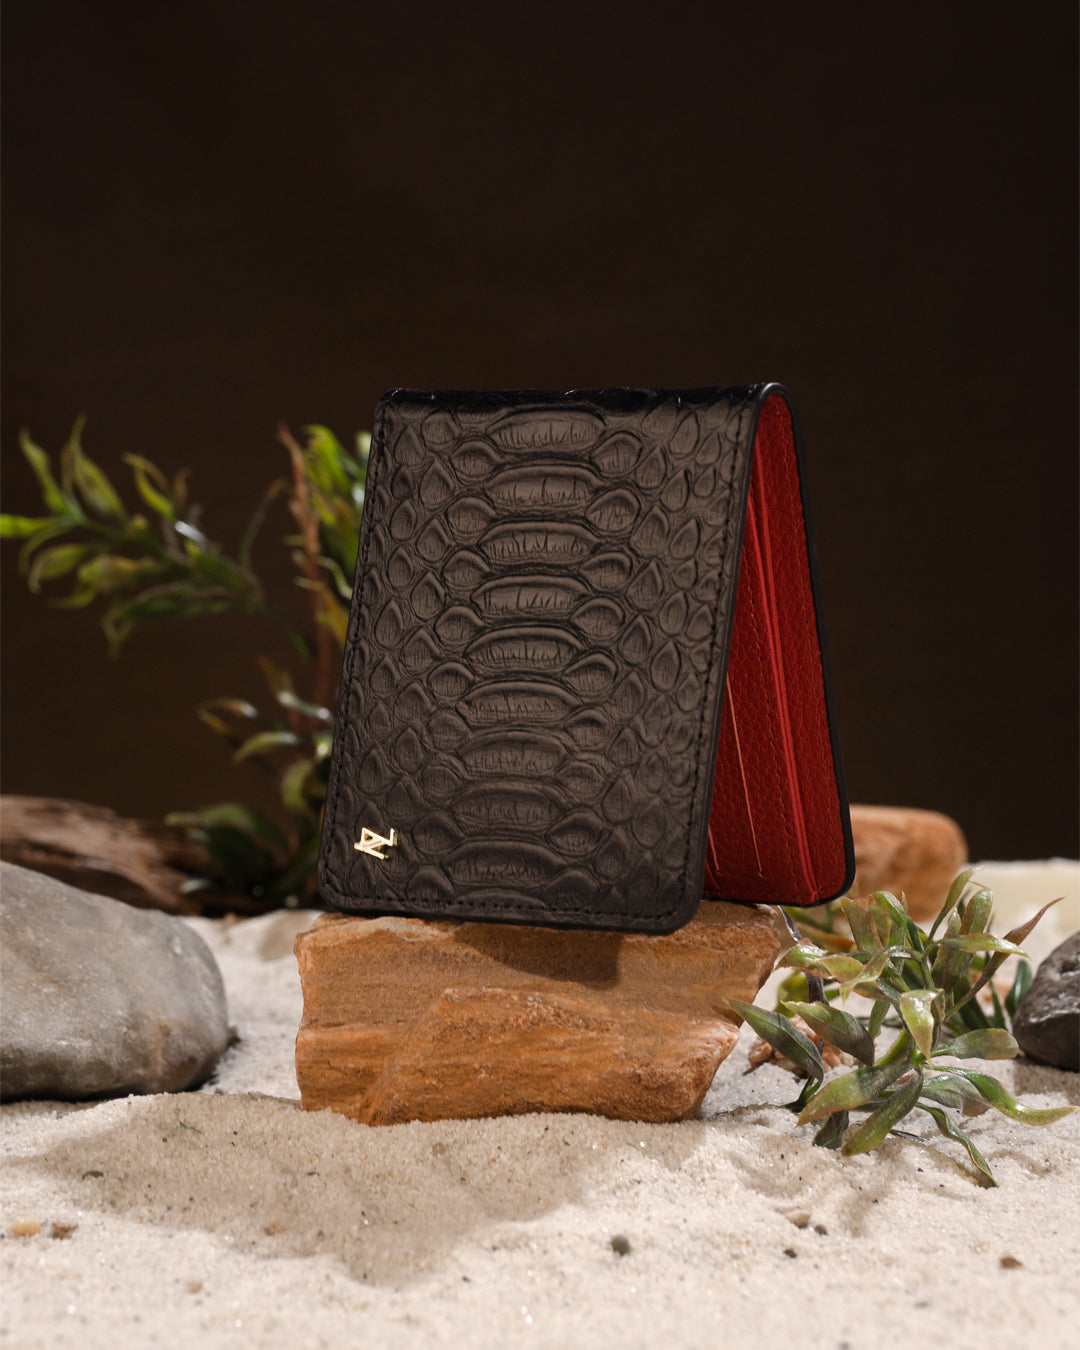 Artemis Python Wallet - Black and Red Leather